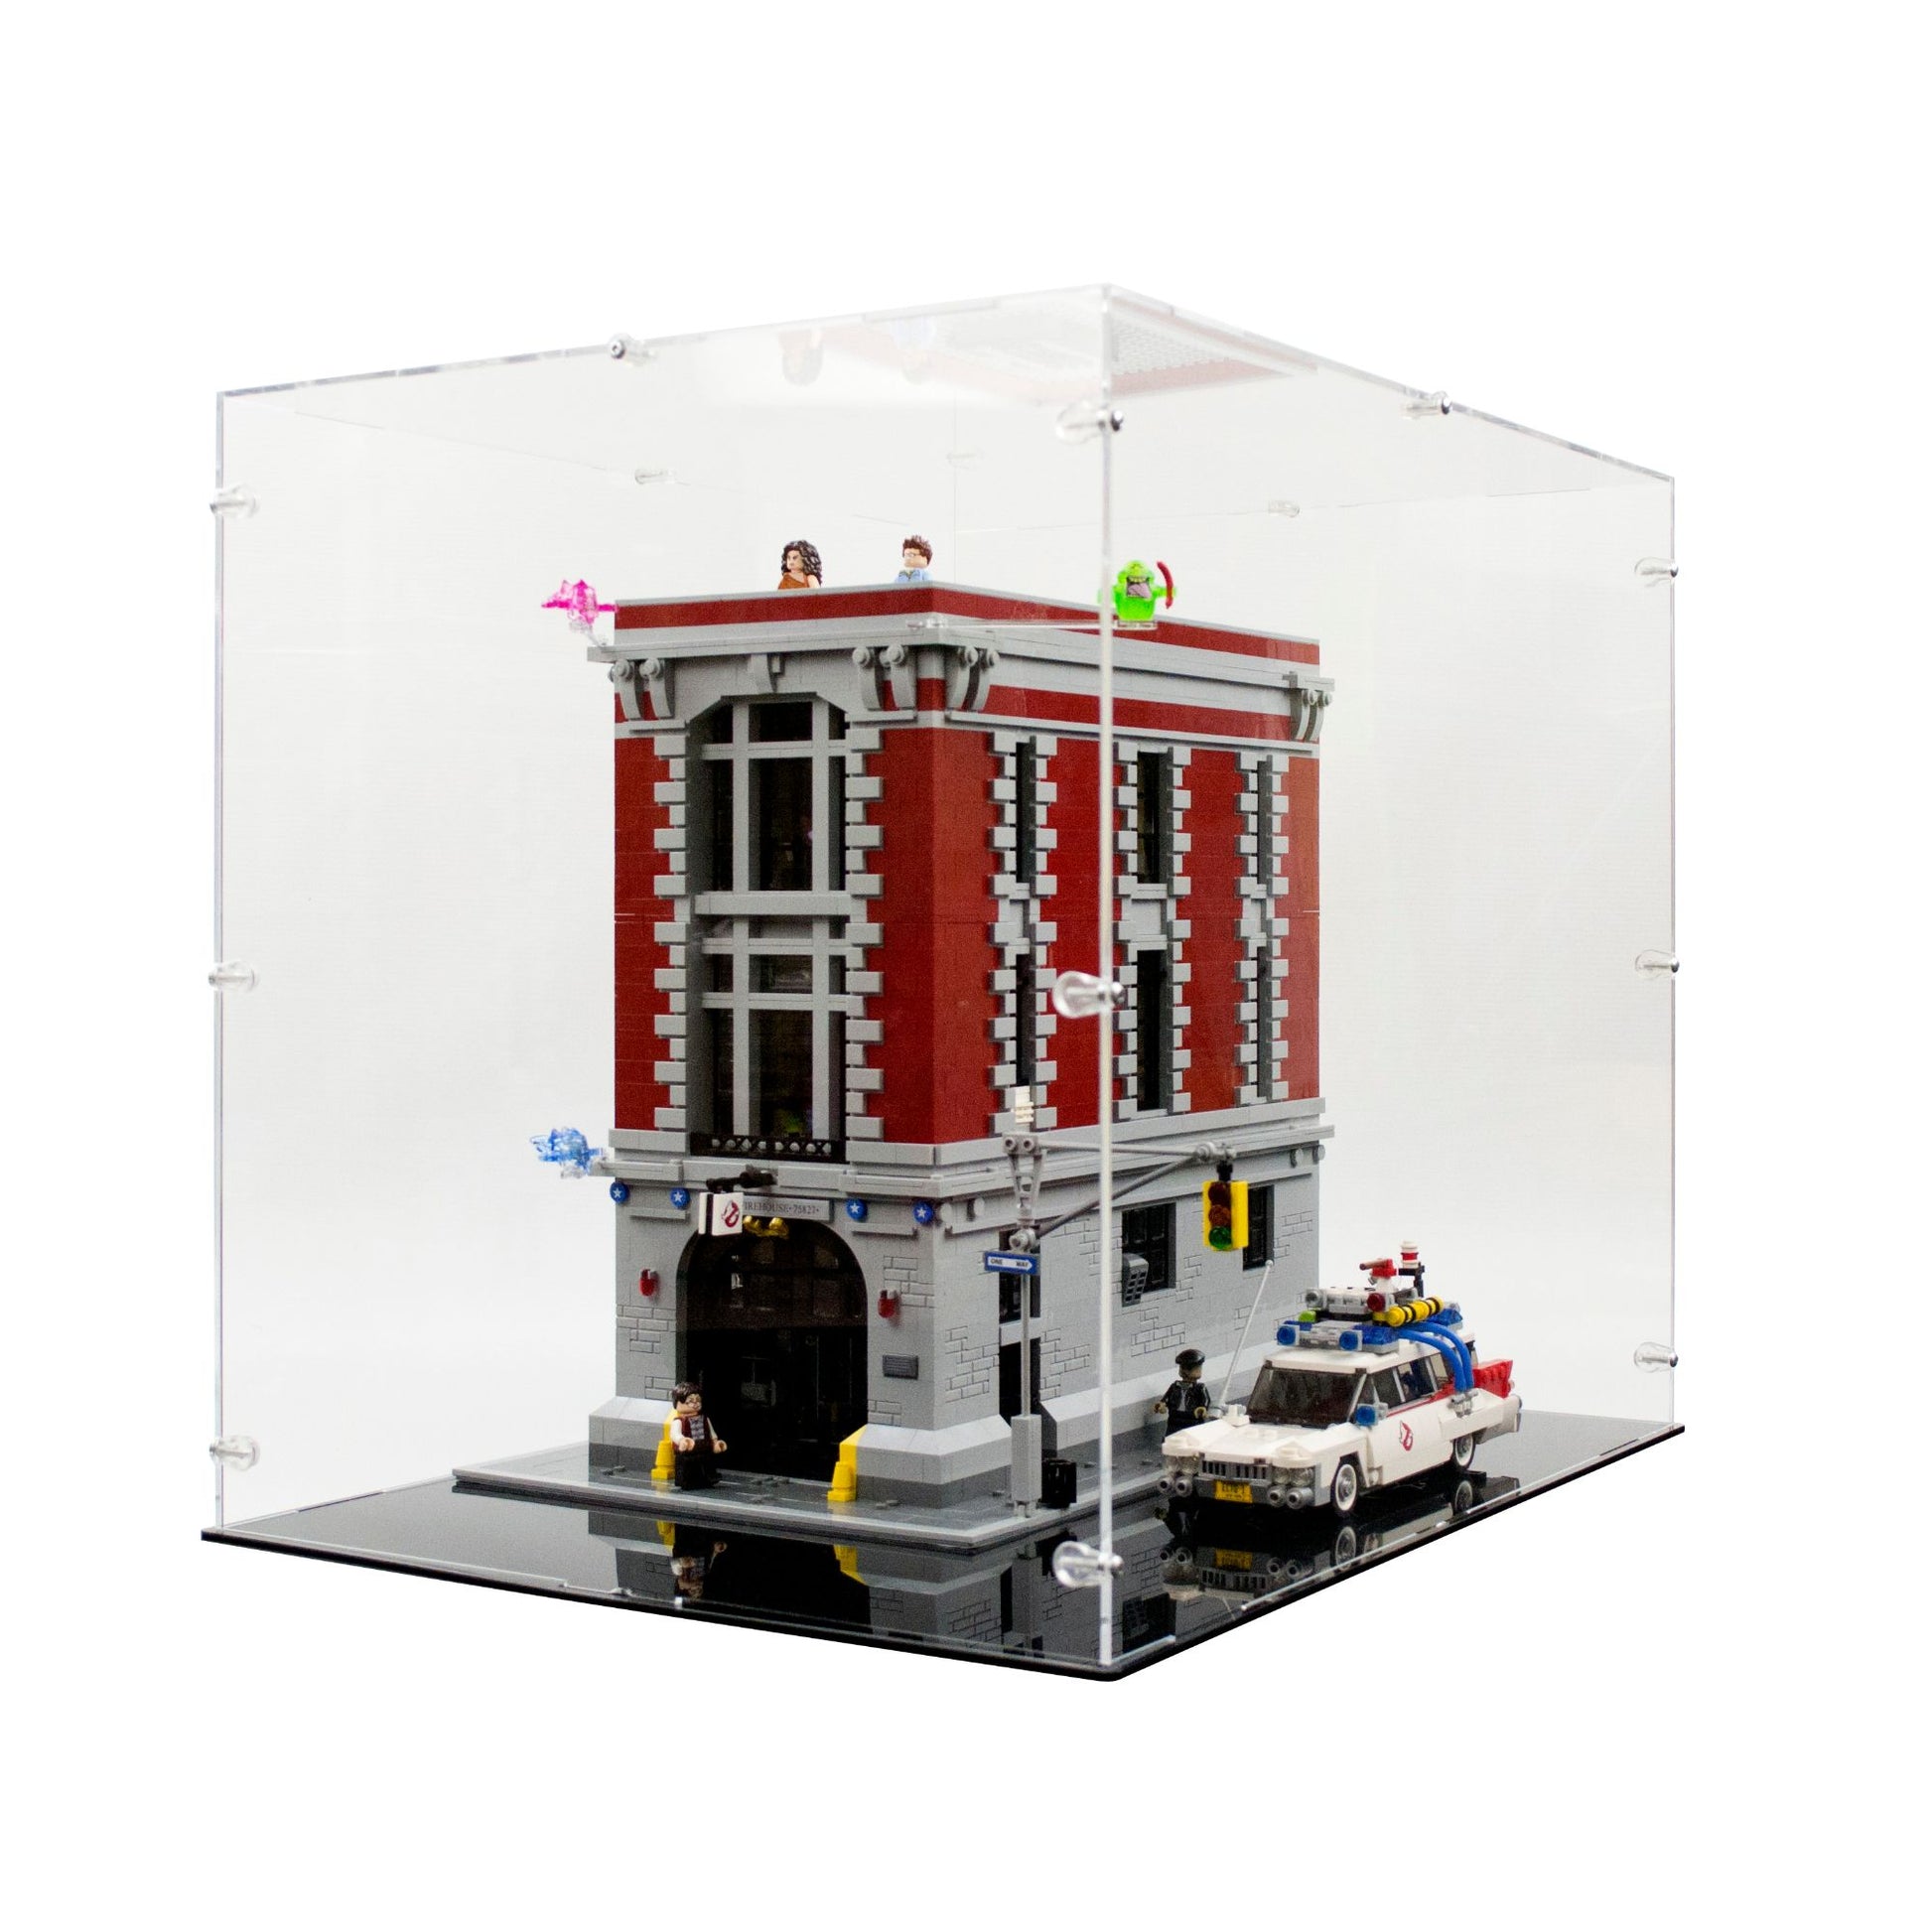 75827 Ghostbusters Firehouse Case – Kingdom Brick Supply